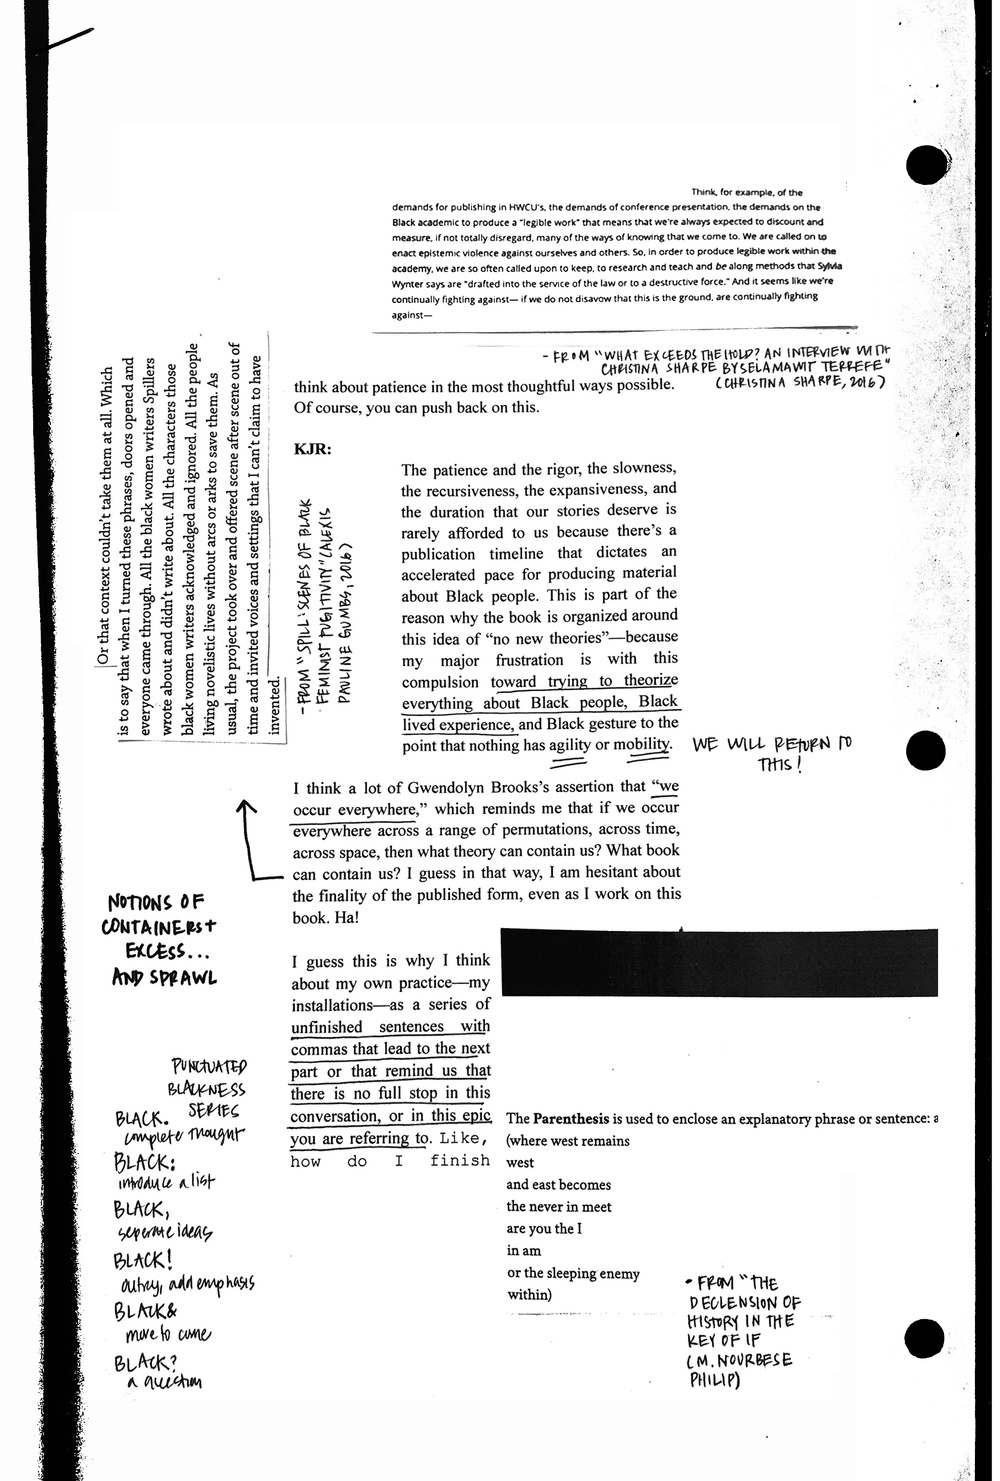 Scan of several blocks of typed and written text, arranged in an unusual layout.